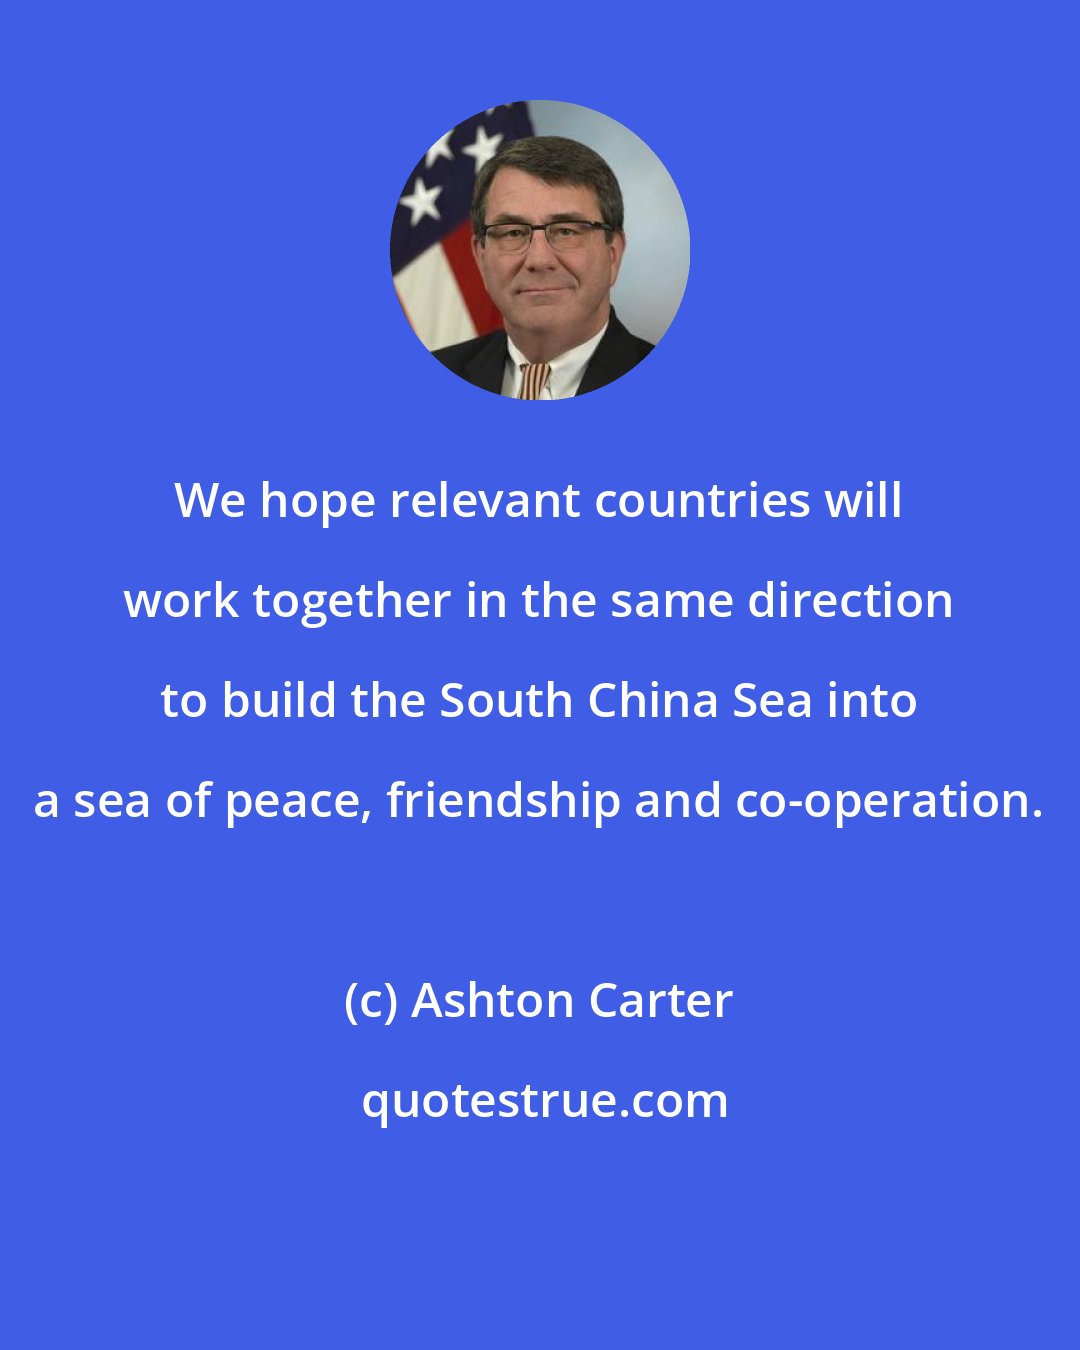 Ashton Carter: We hope relevant countries will work together in the same direction to build the South China Sea into a sea of peace, friendship and co-operation.